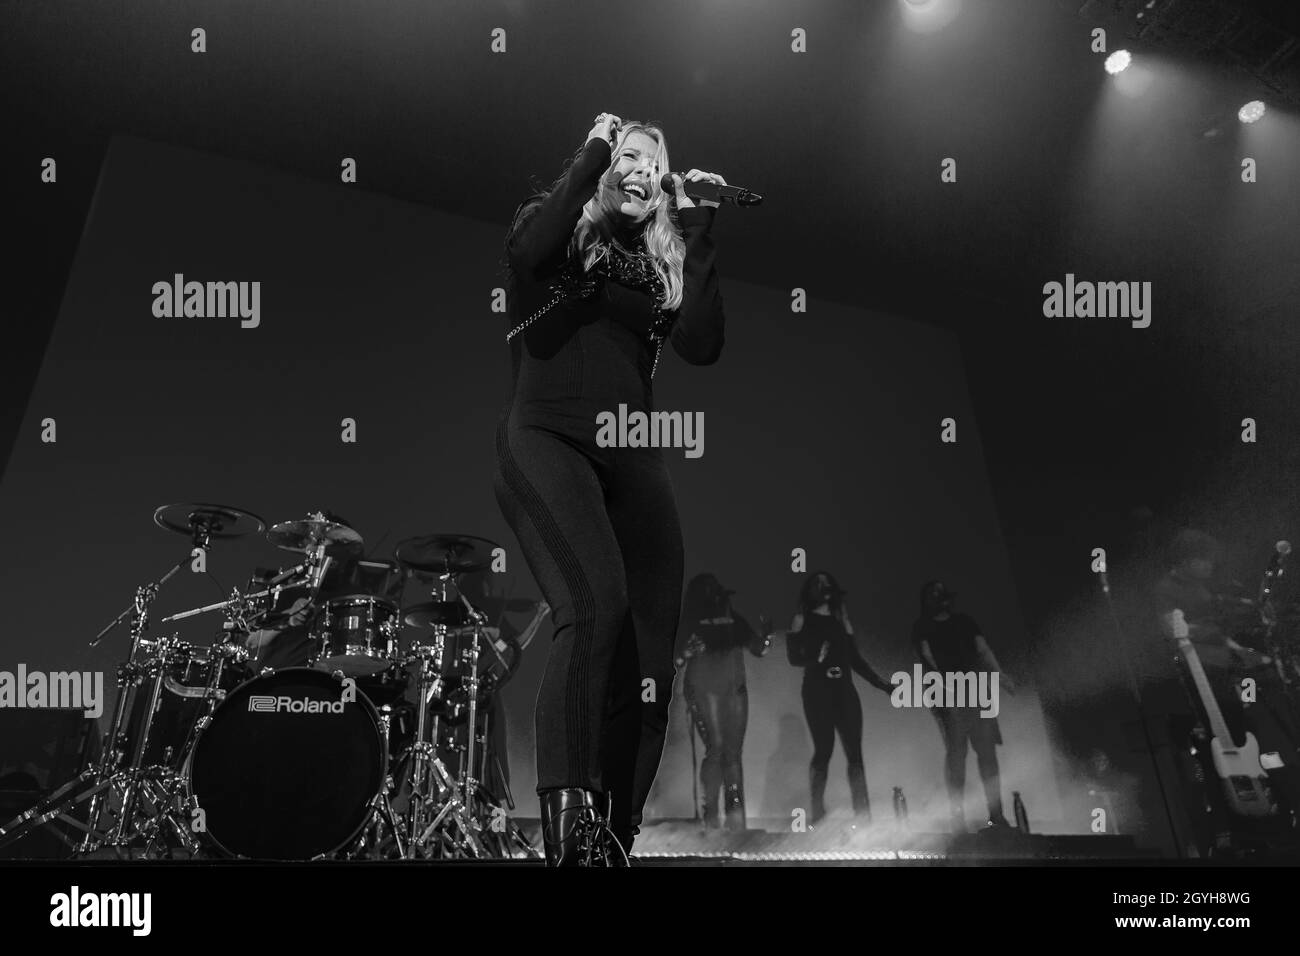 Glasgow, Scotland 7th October 2021. Ellie Goulding performs at the O2 Academy on the first night of her Brightest Blue Tour. Stock Photo